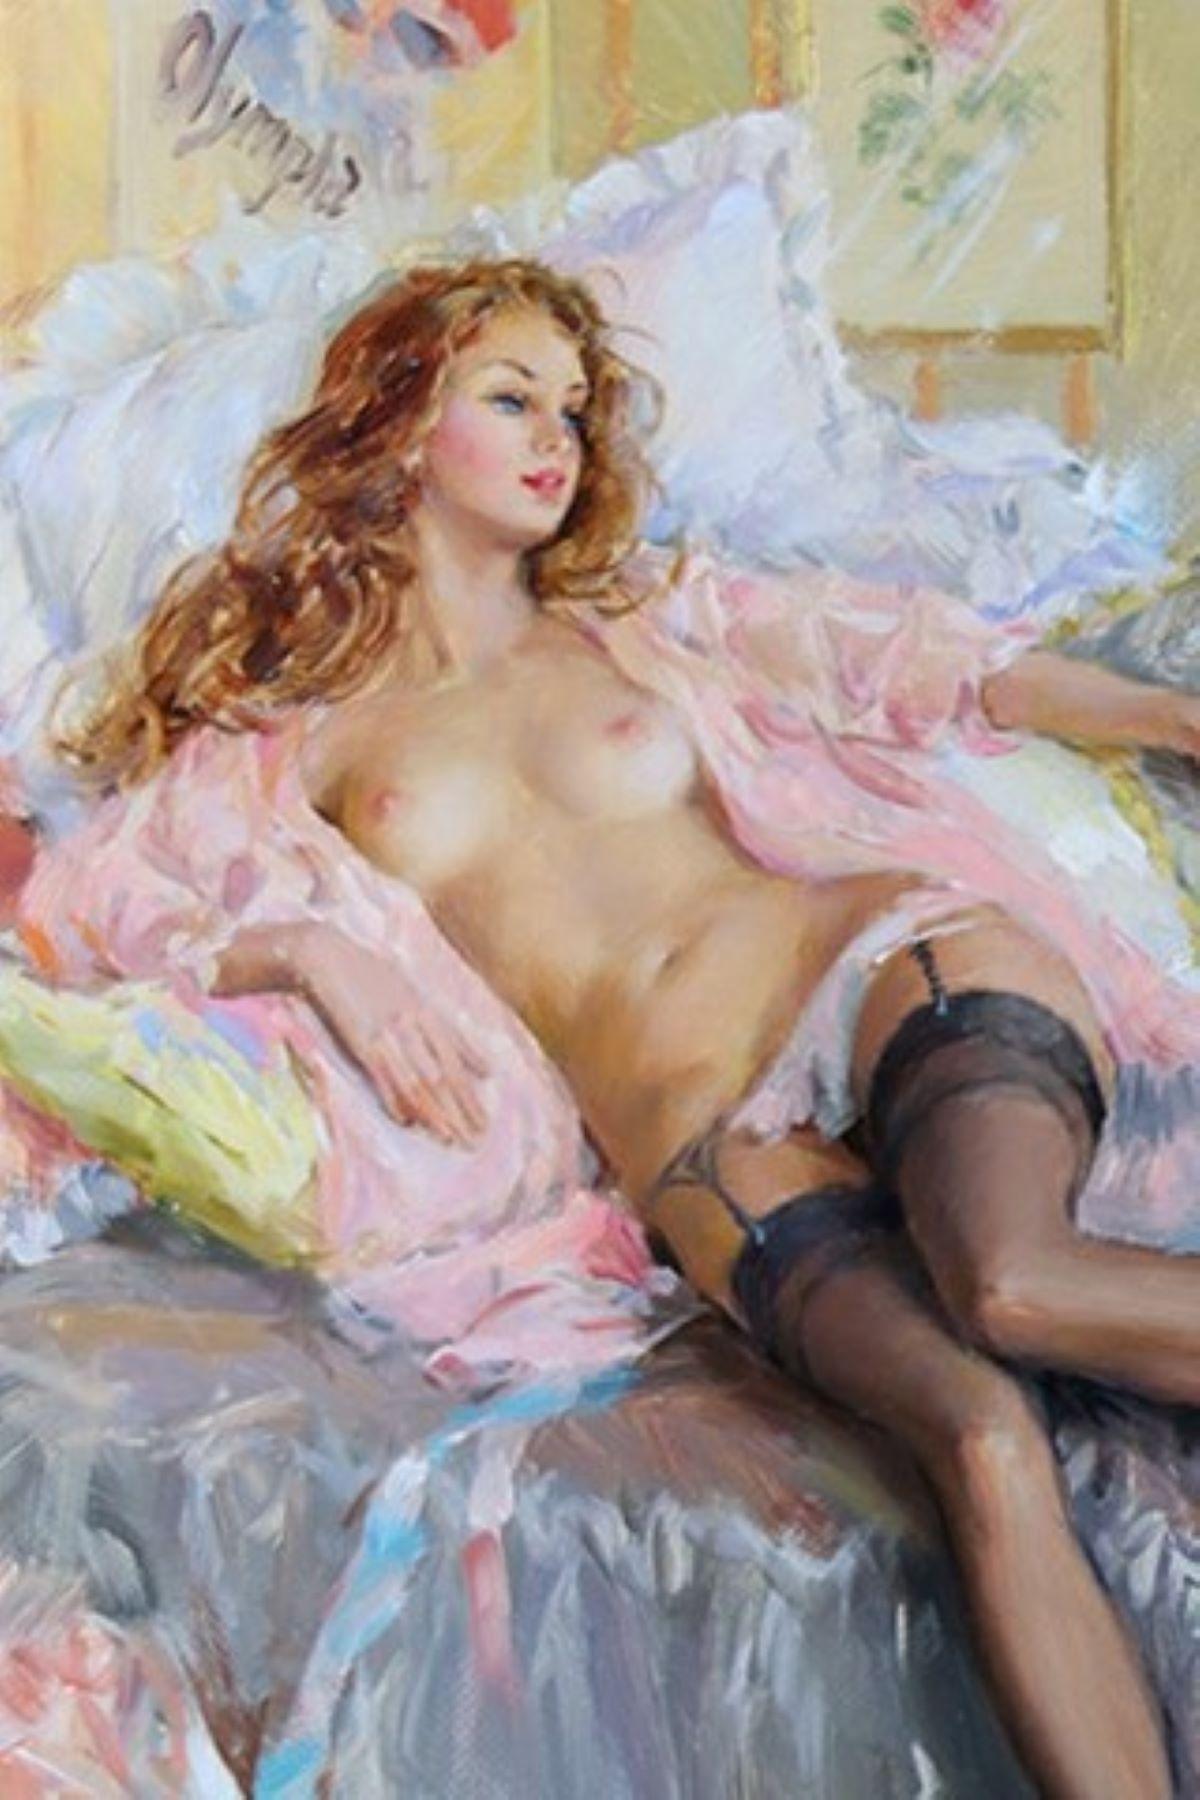 Konstantin Razumov 
(Born 1974) Russian

Elegant Nude Lady Lying on a Bed in a Pink Peignoir 
Oil on canvas: 14 x 11 inches. Frame: 20 x 17 inches. 

Konstantin Razumov's work has been offered at auction multiple times over the past 25 years, with